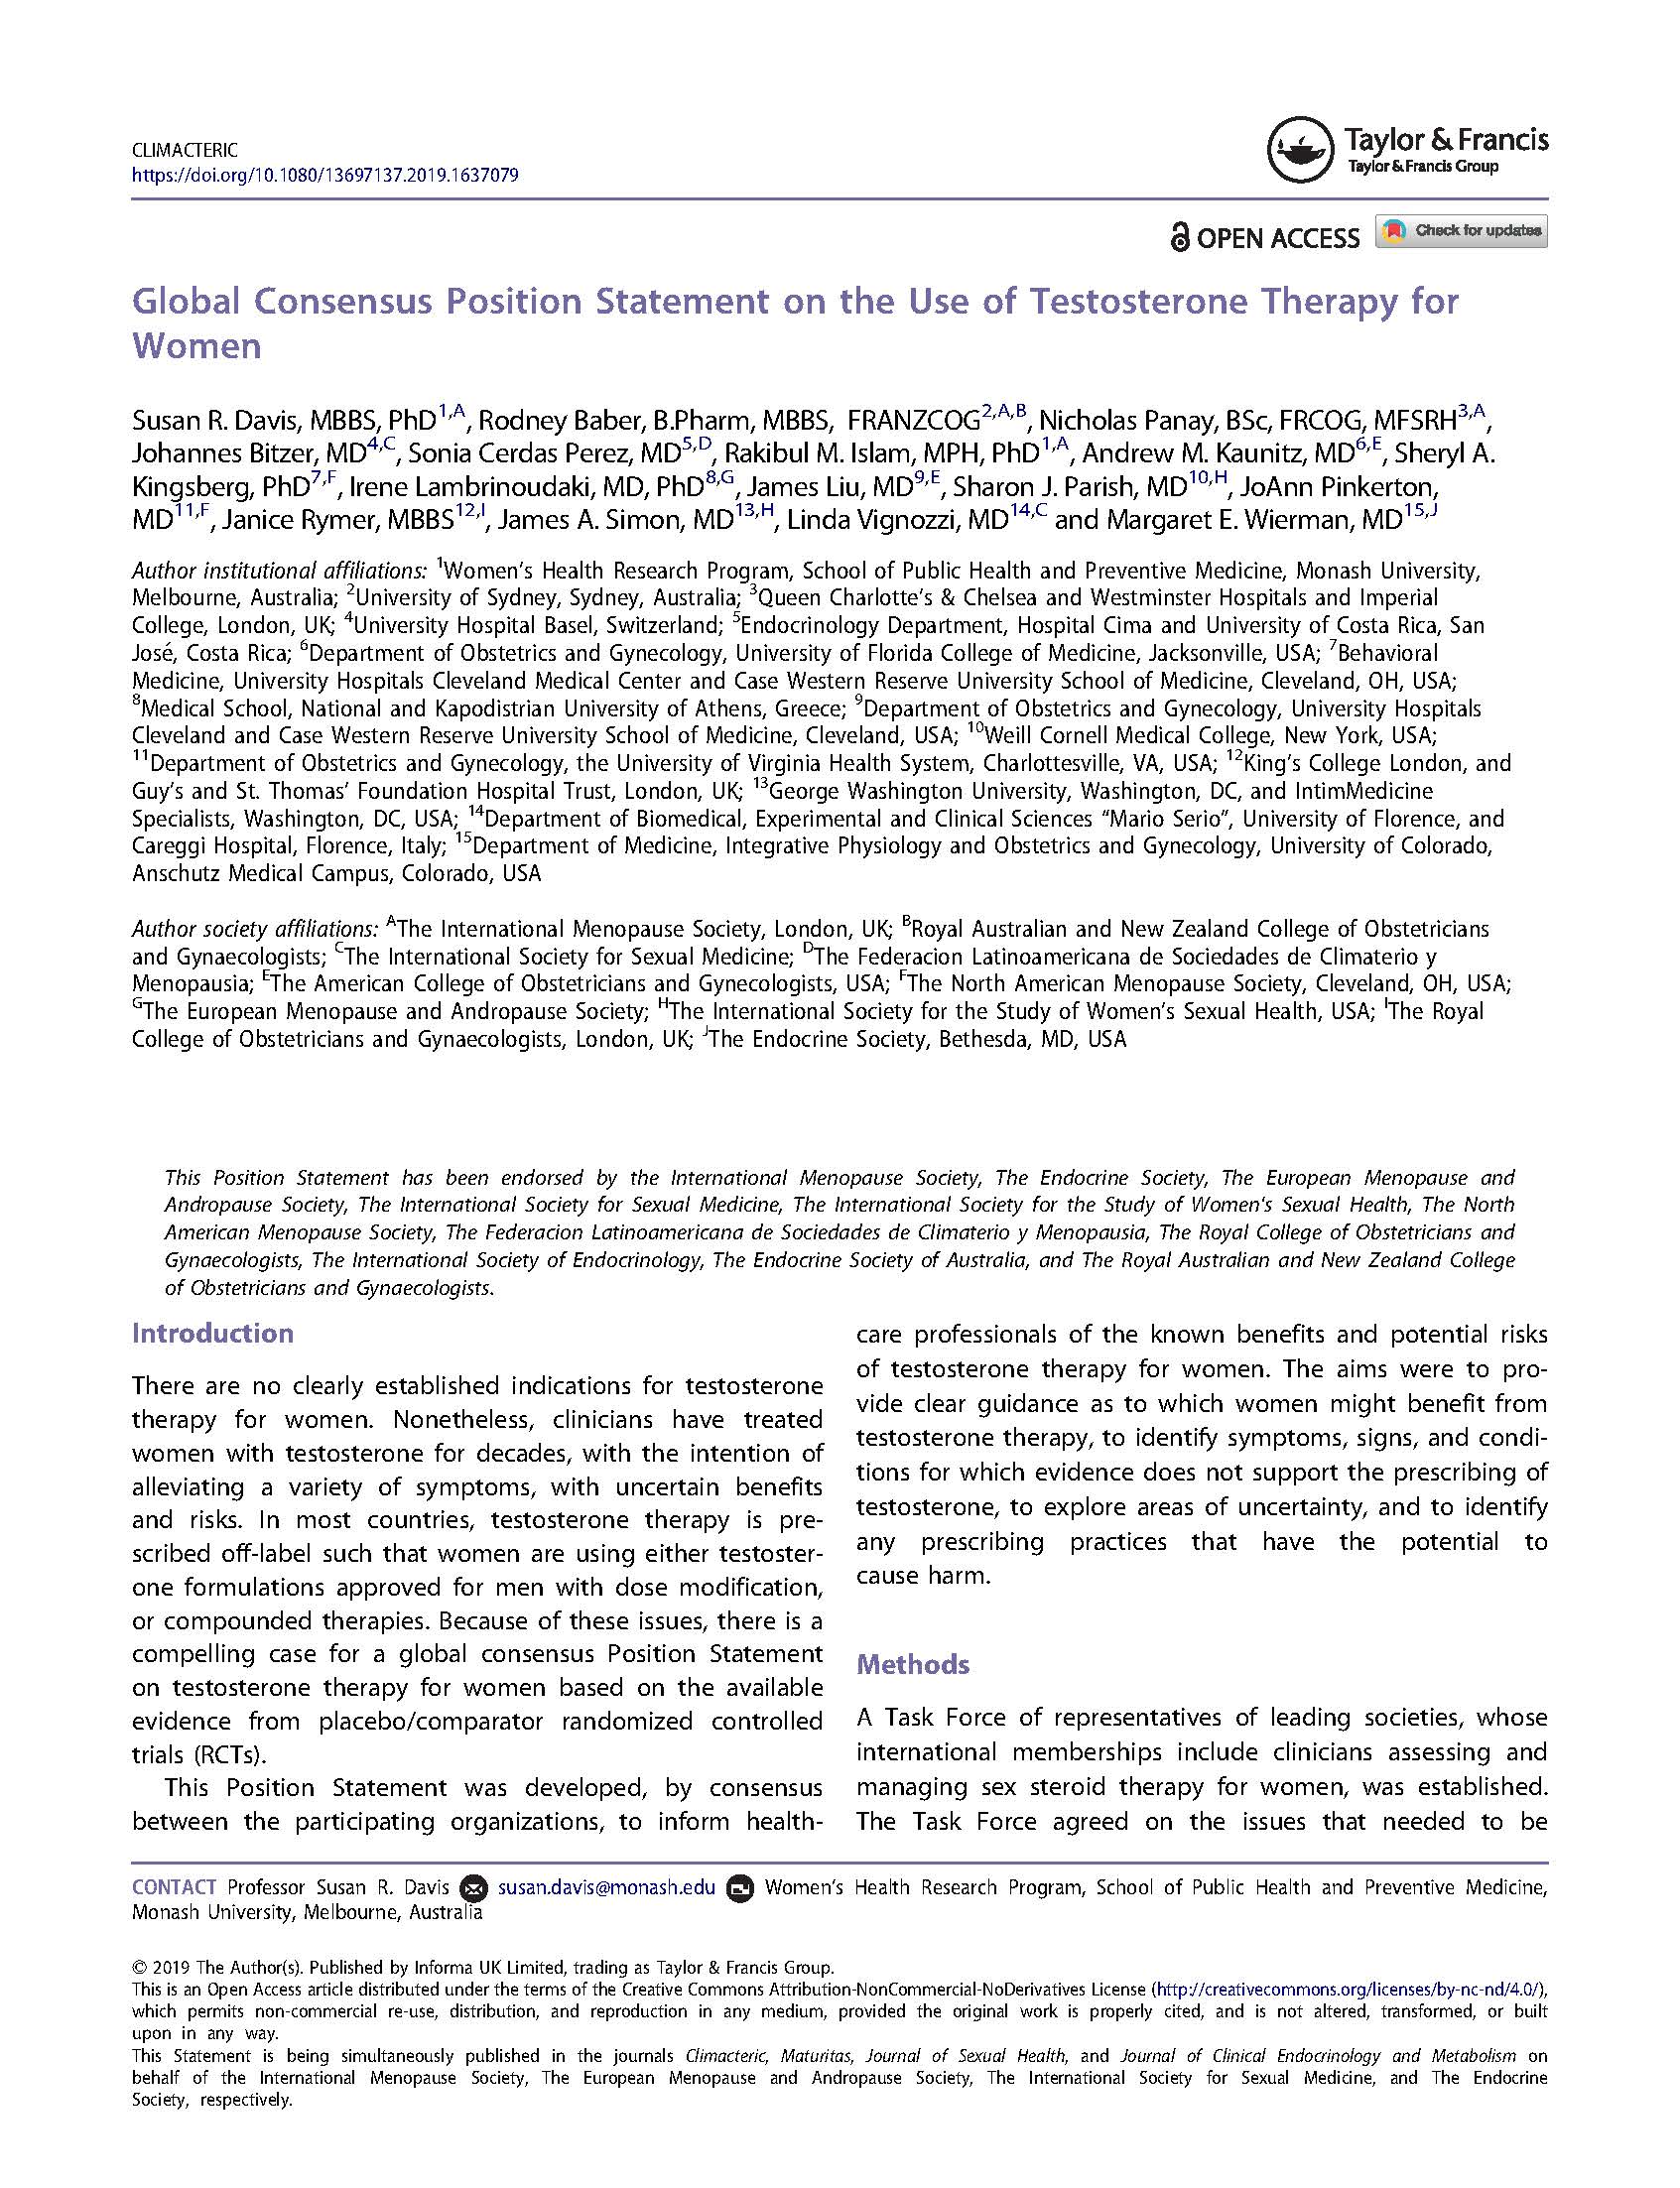 Global Consensus Position Statement on the Use of Testosterone Therapy for Women